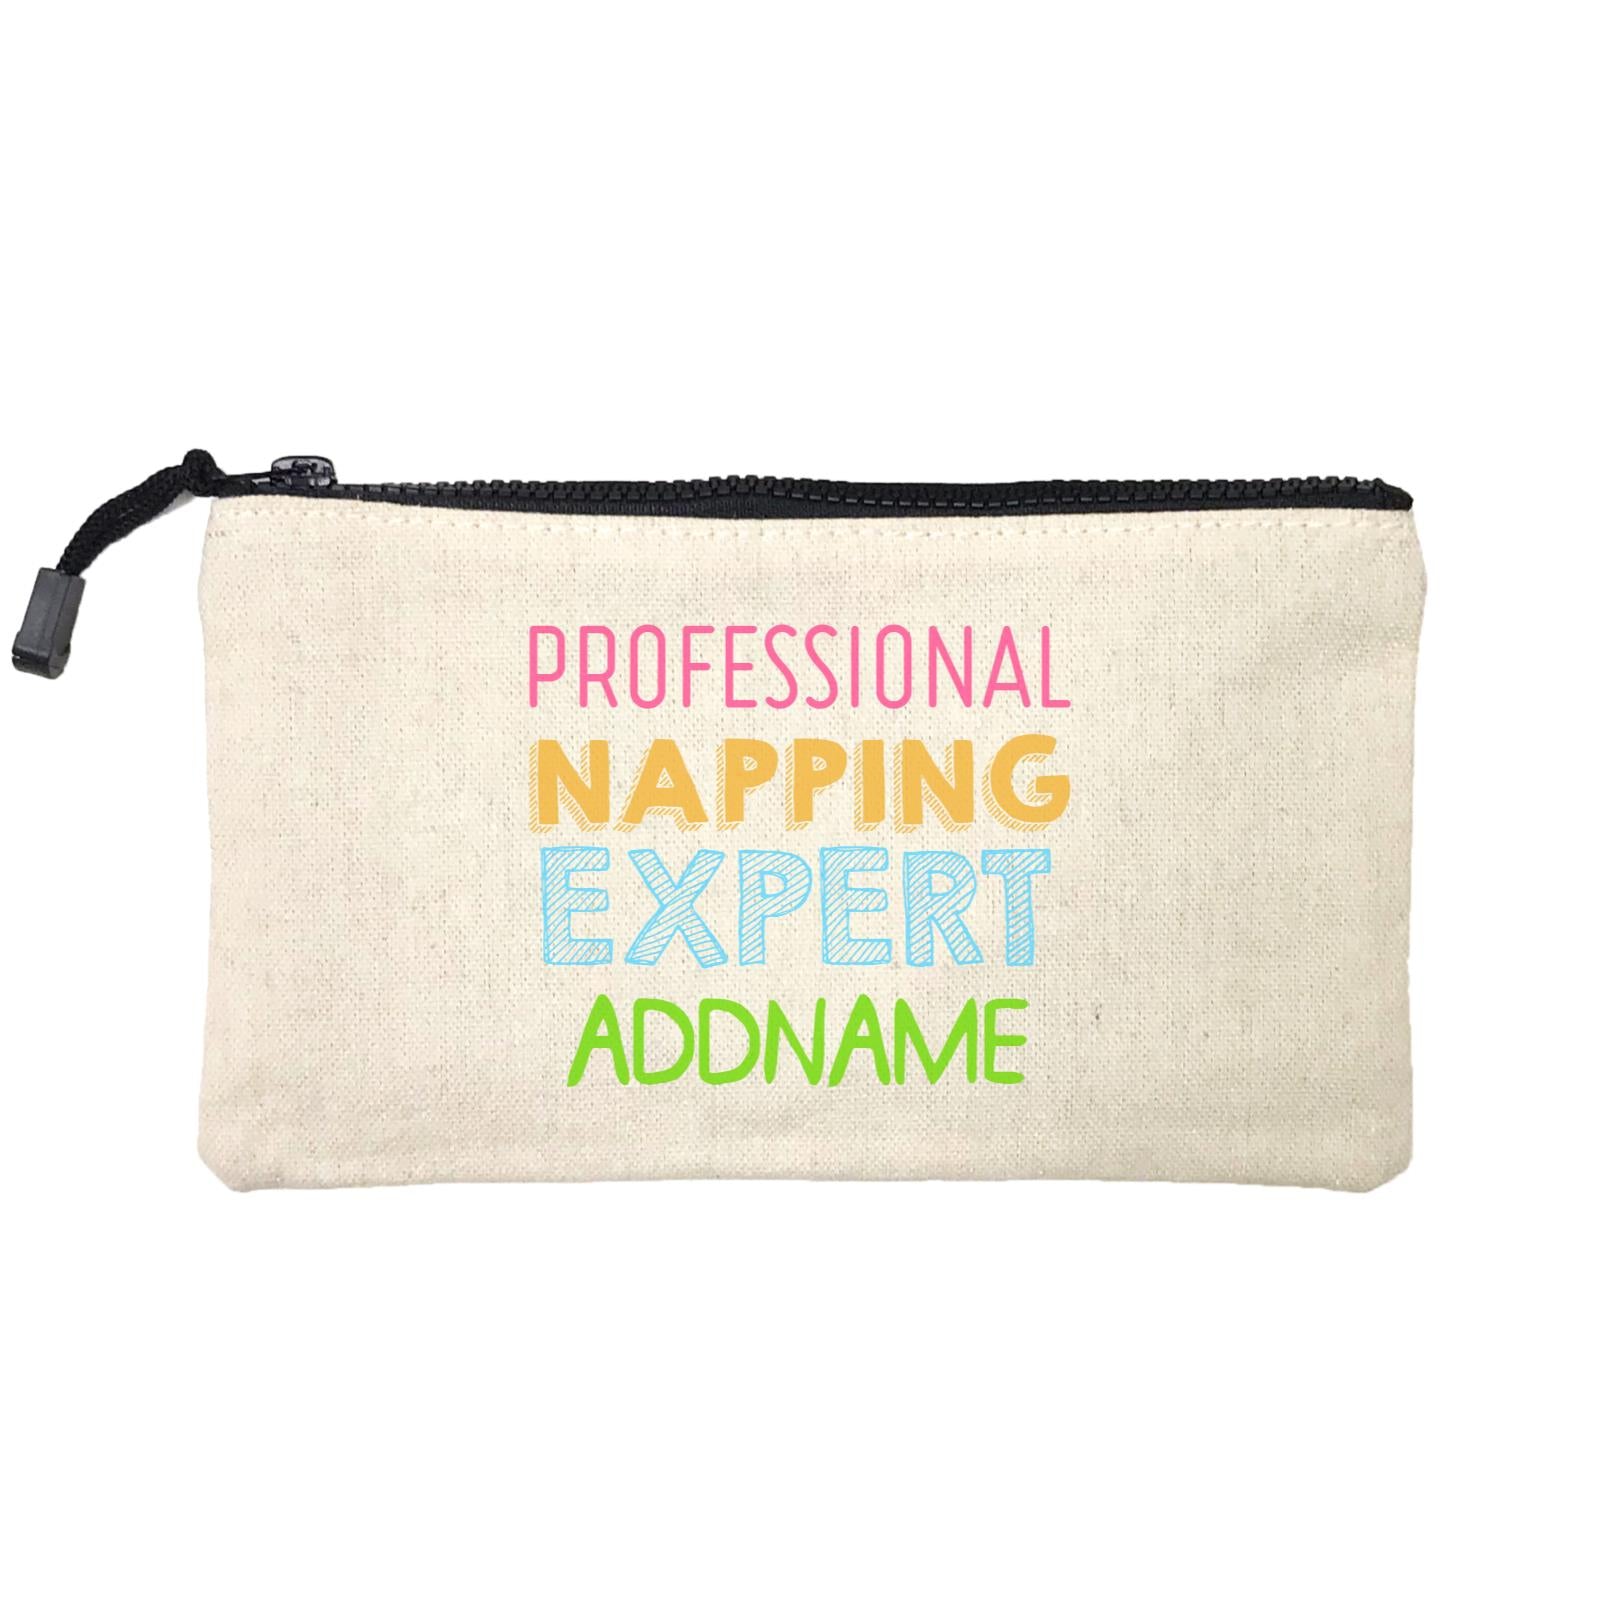 Professional Napping Expert Addname Mini Accessories Stationery Pouch